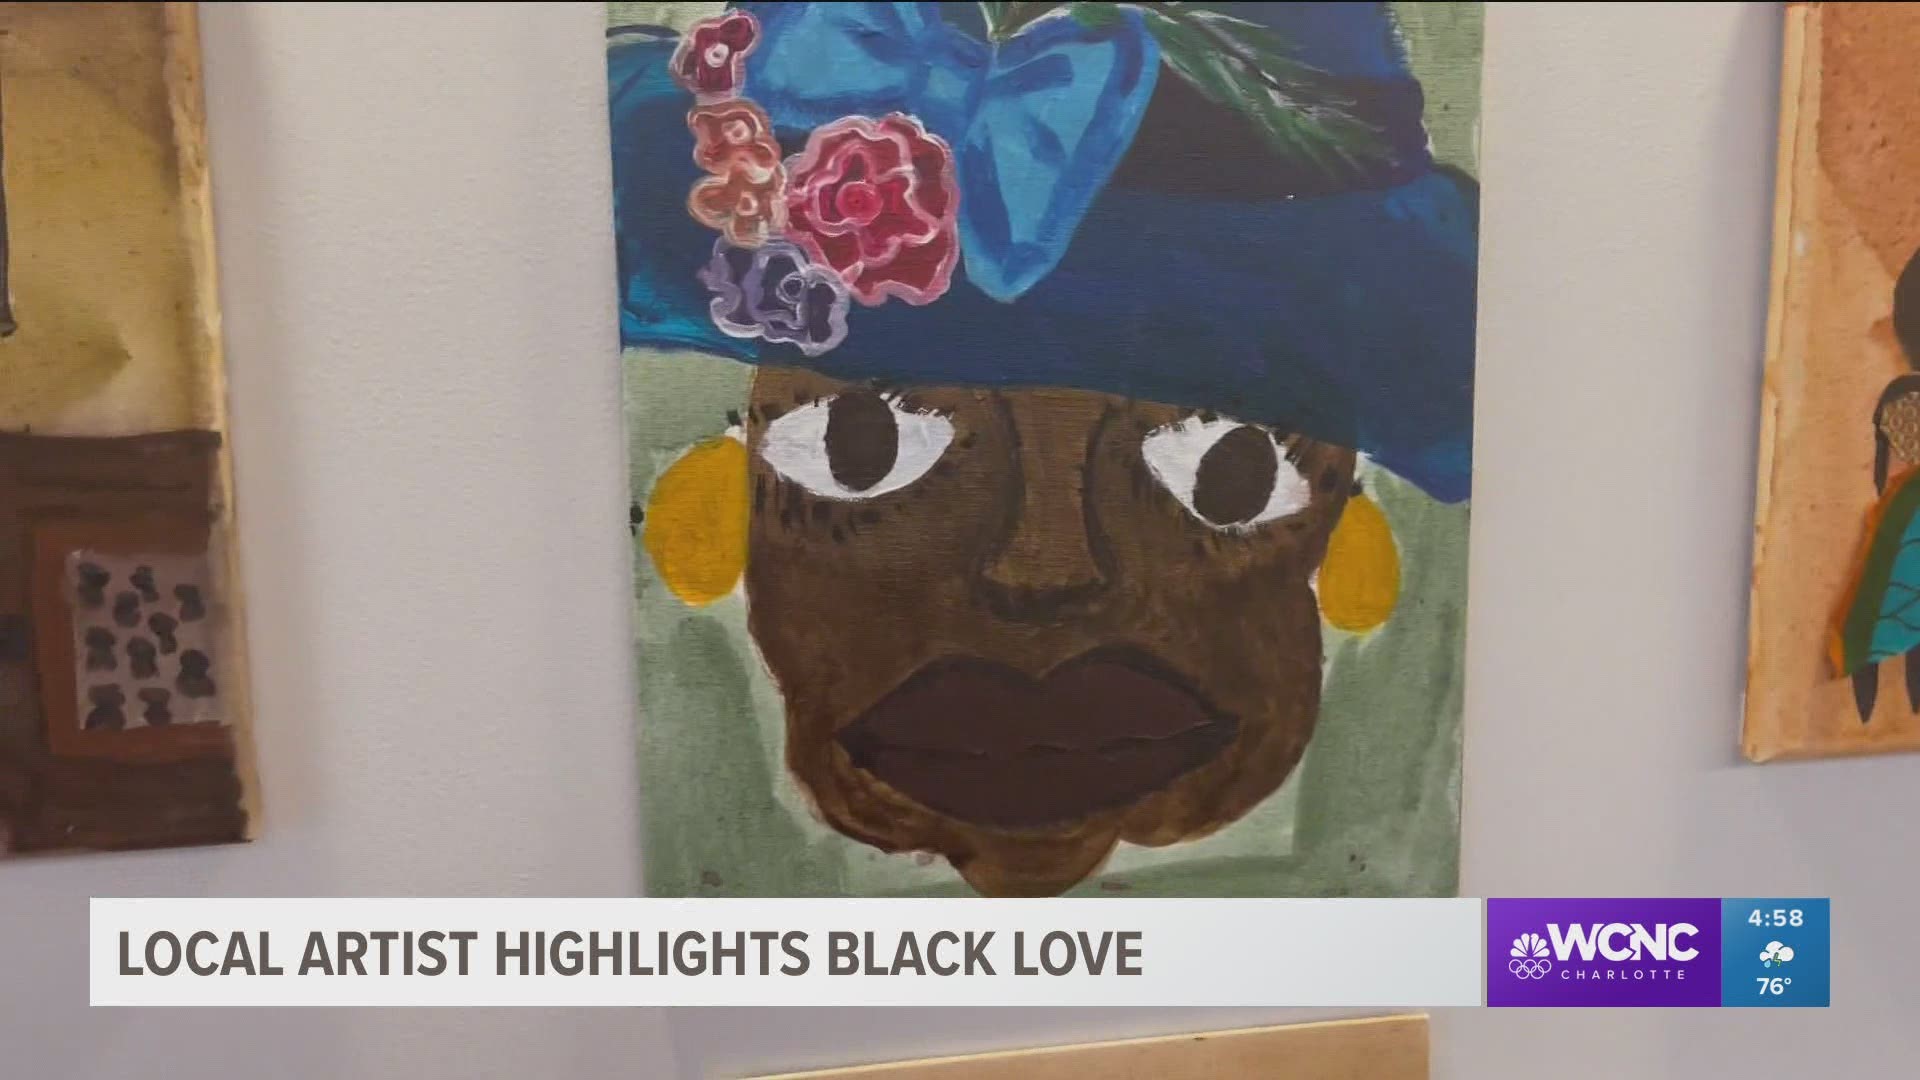 Marqus Hardy-Owens, 19, says he aimed to show what Black queer love is through his Spirit Square exhibit.